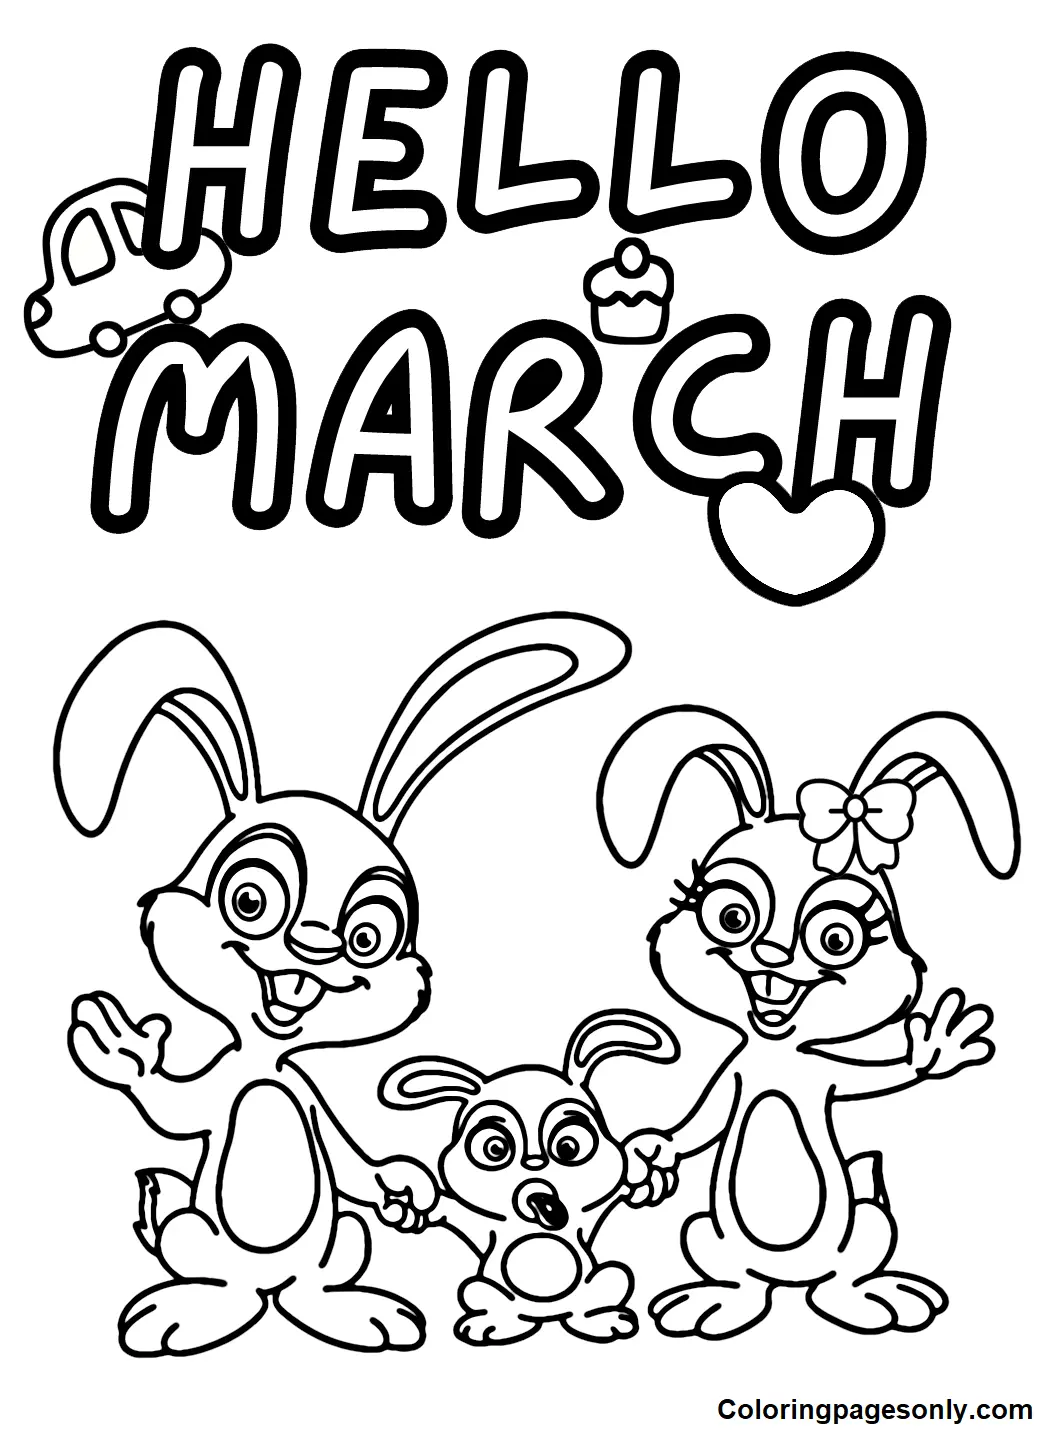 March Coloring Pages